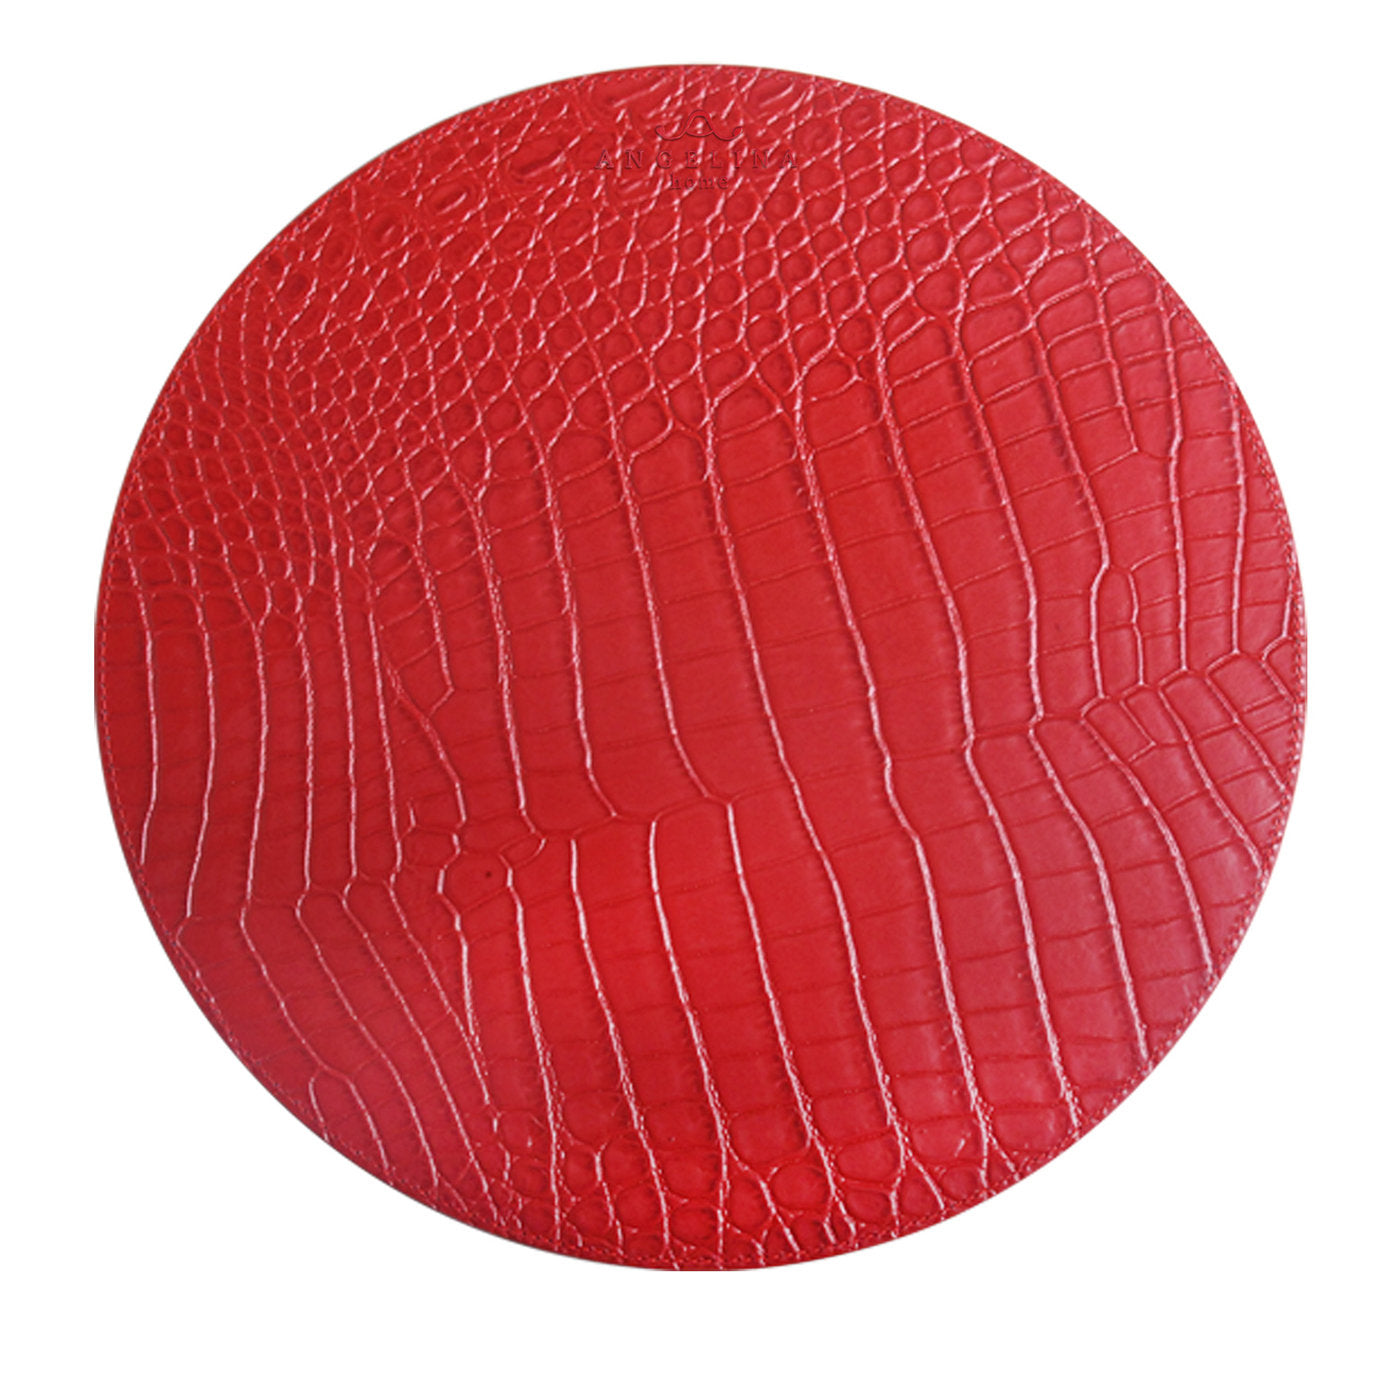 Kenya Small Set of 2 Round Red Leather Placemats - Alternative view 4